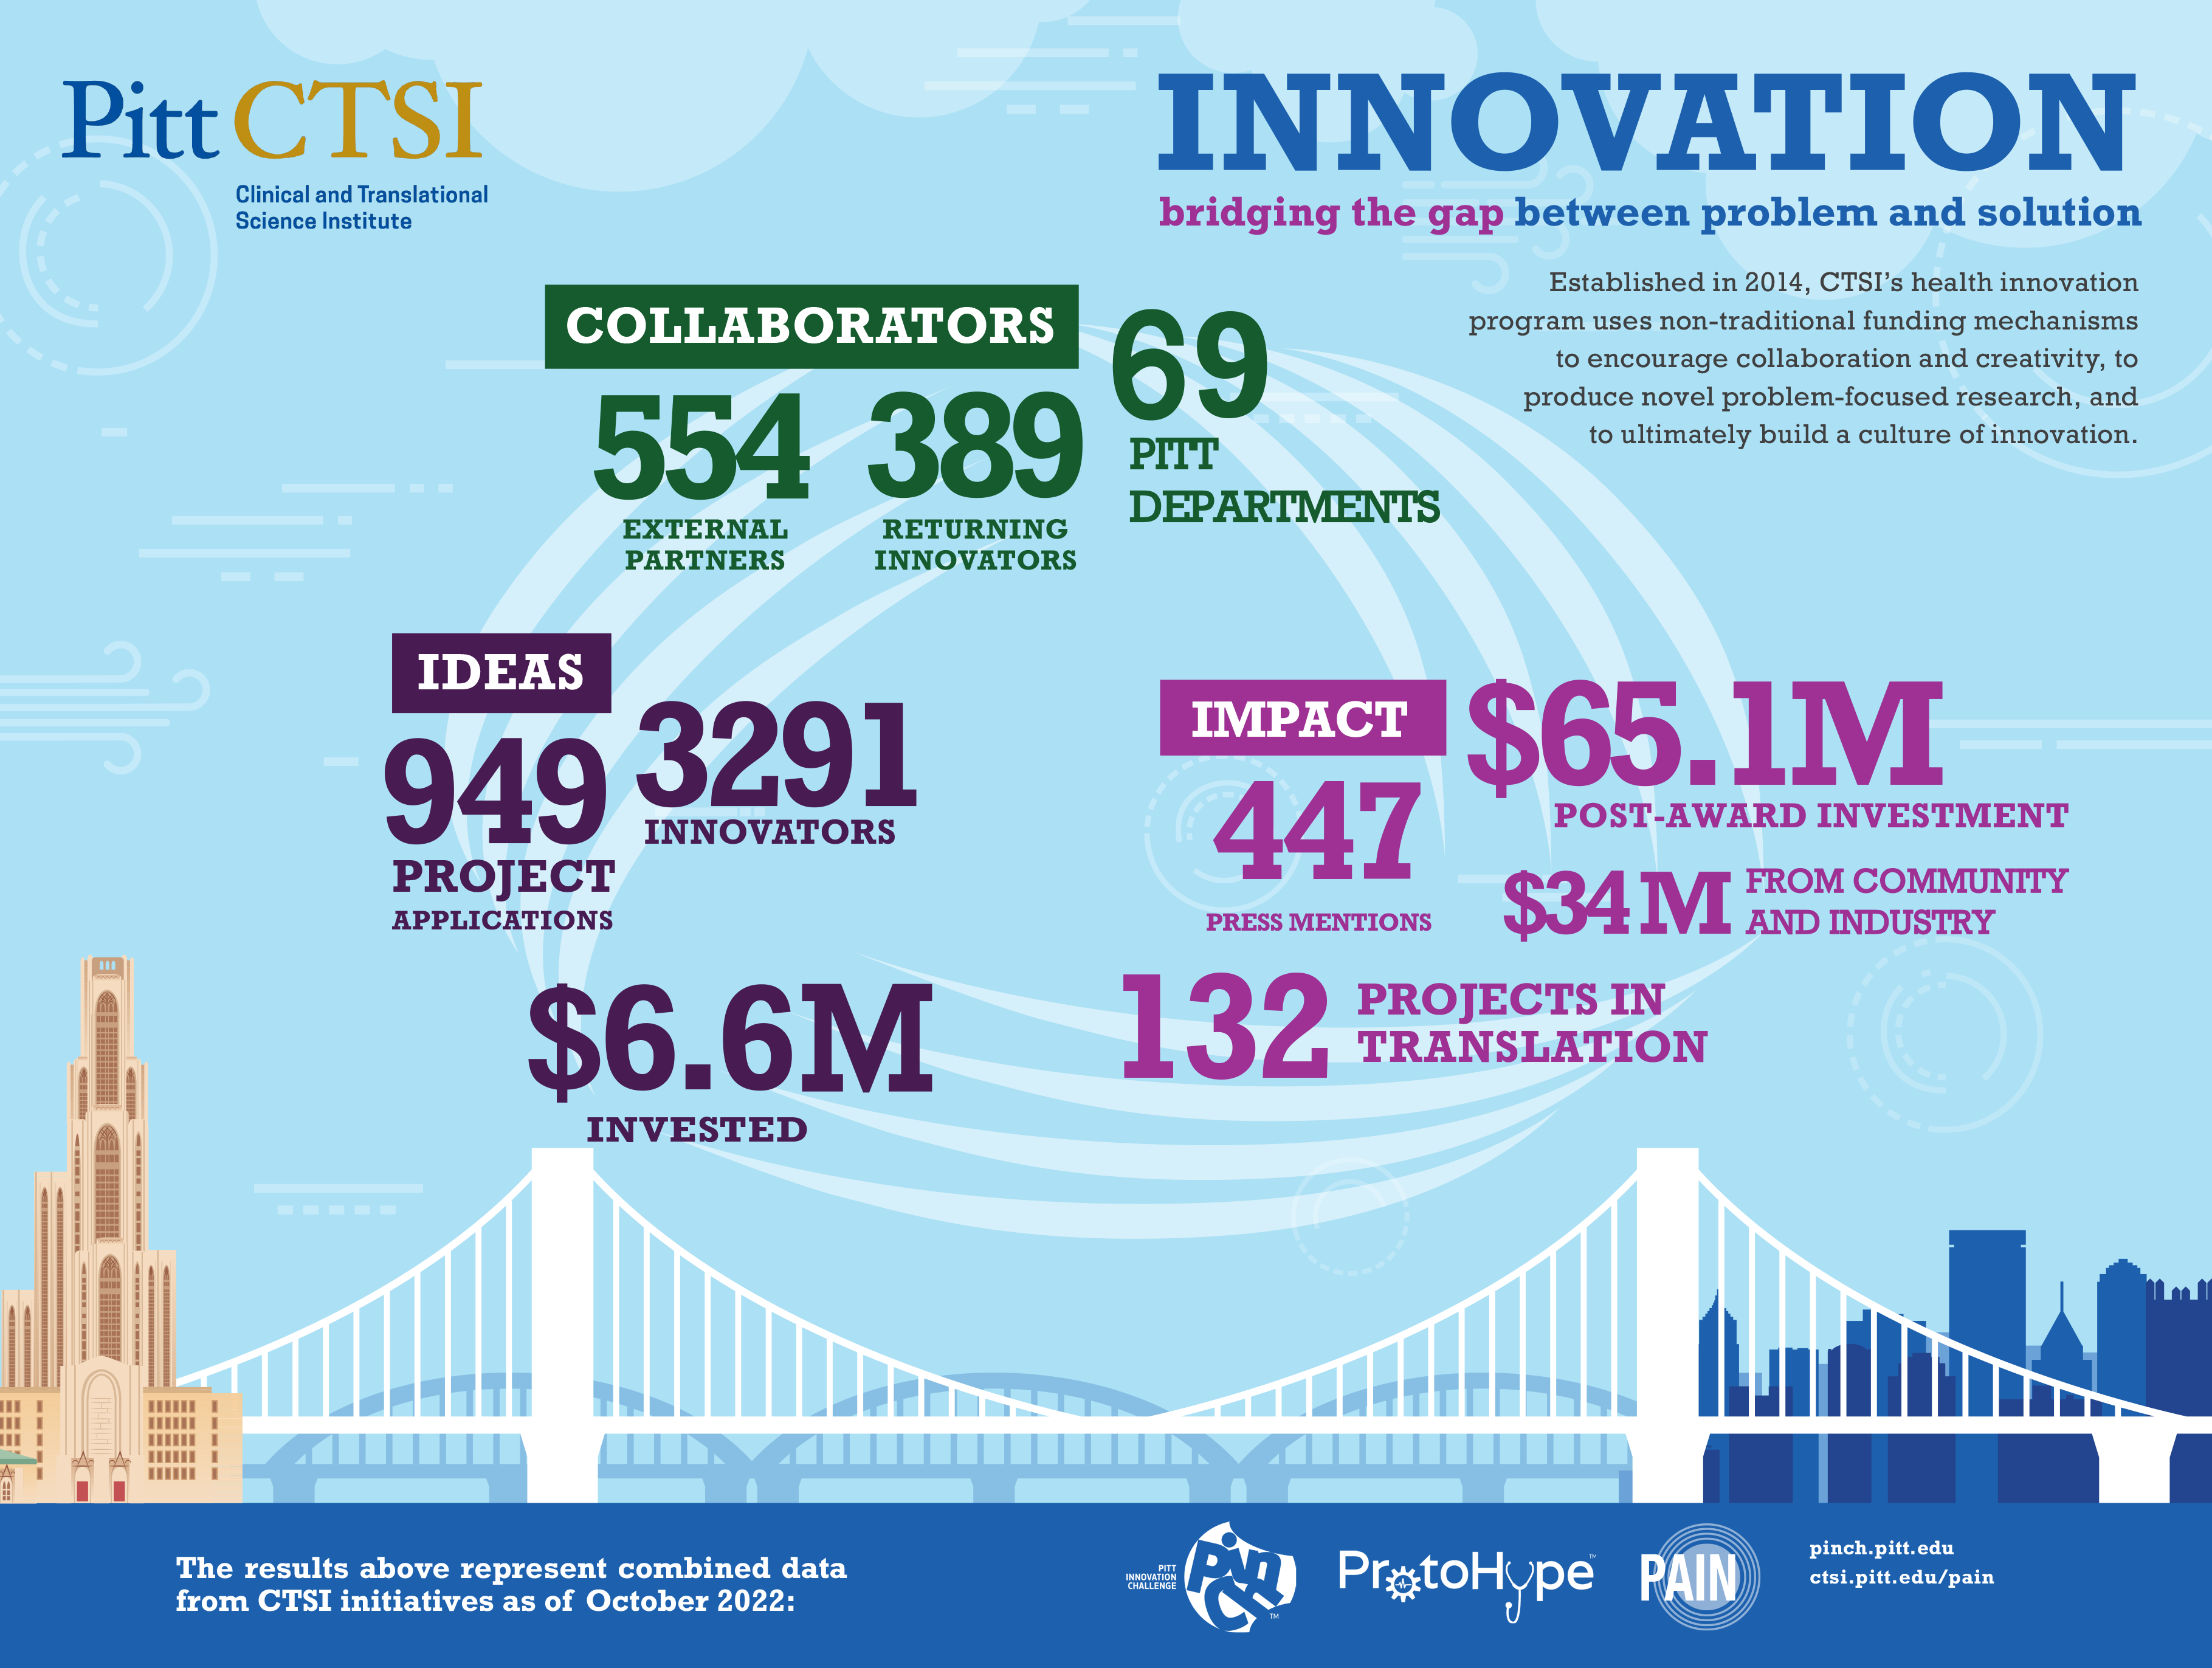 Since 2014, the CTSI Innovation Core has received 949 applications and awarded $6.6 million across 132 projects. Subsequently, this has led to $65.1 million in post-award investments.